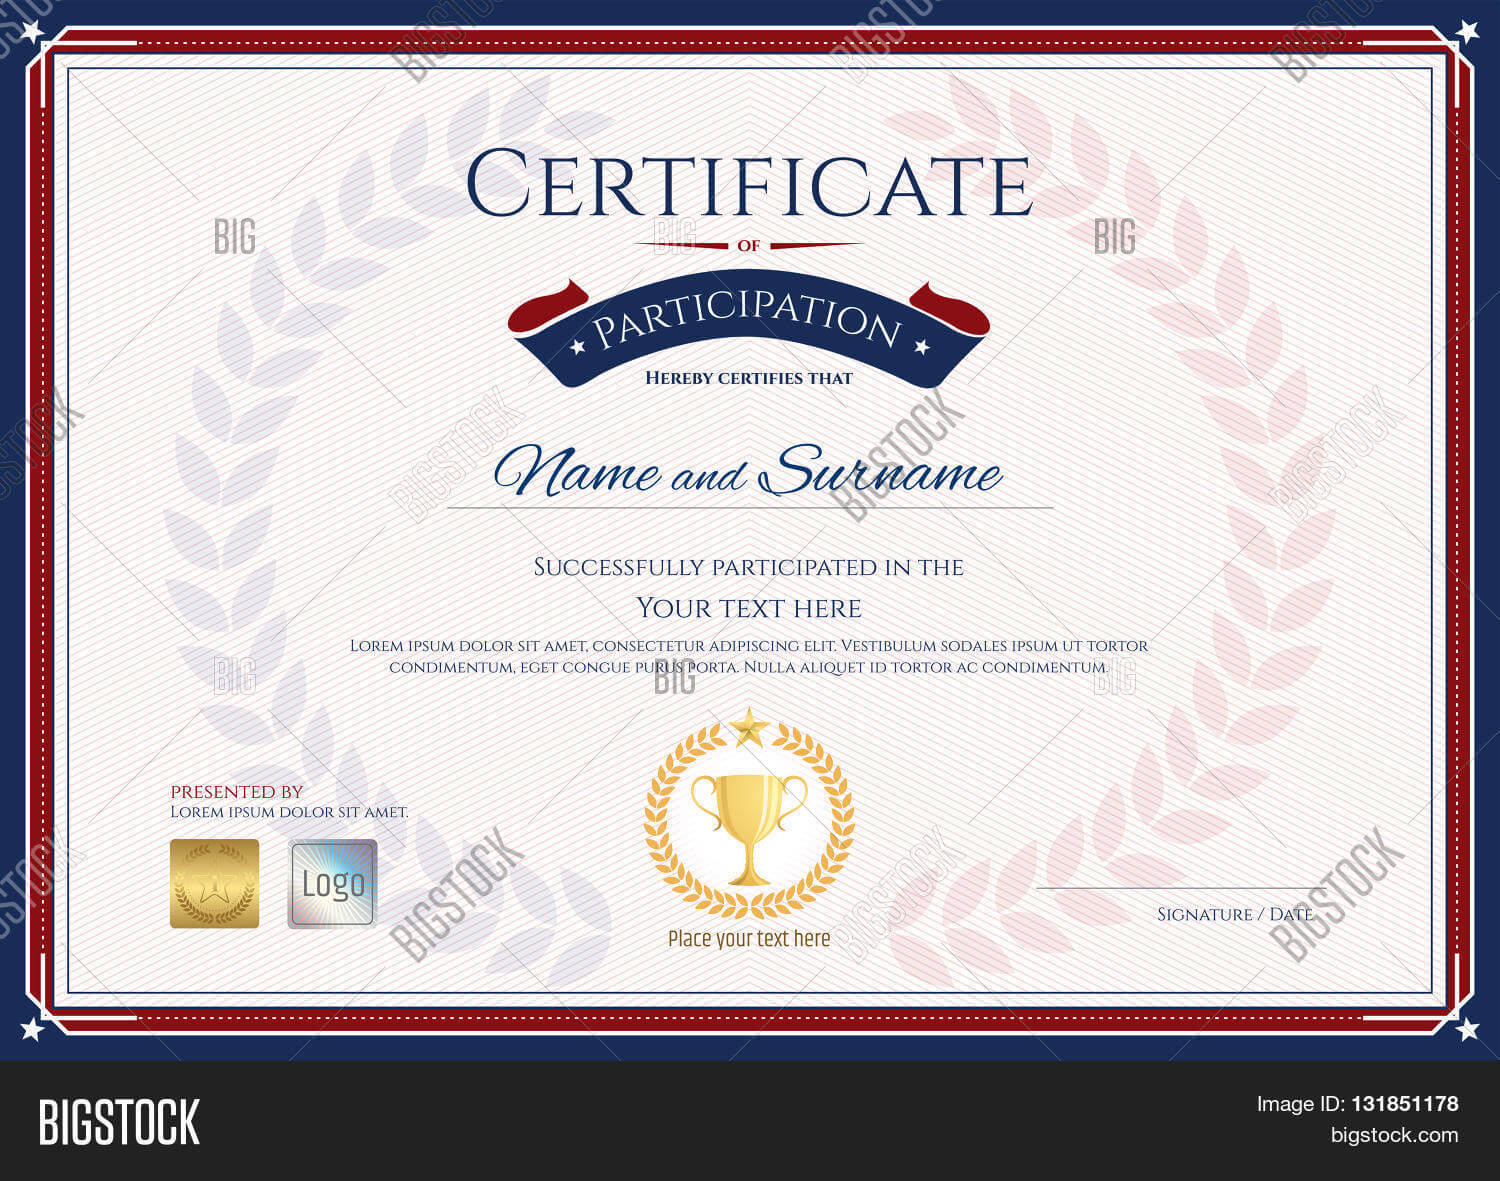 Certificate Vector & Photo (Free Trial) | Bigstock For Certification Of Participation Free Template